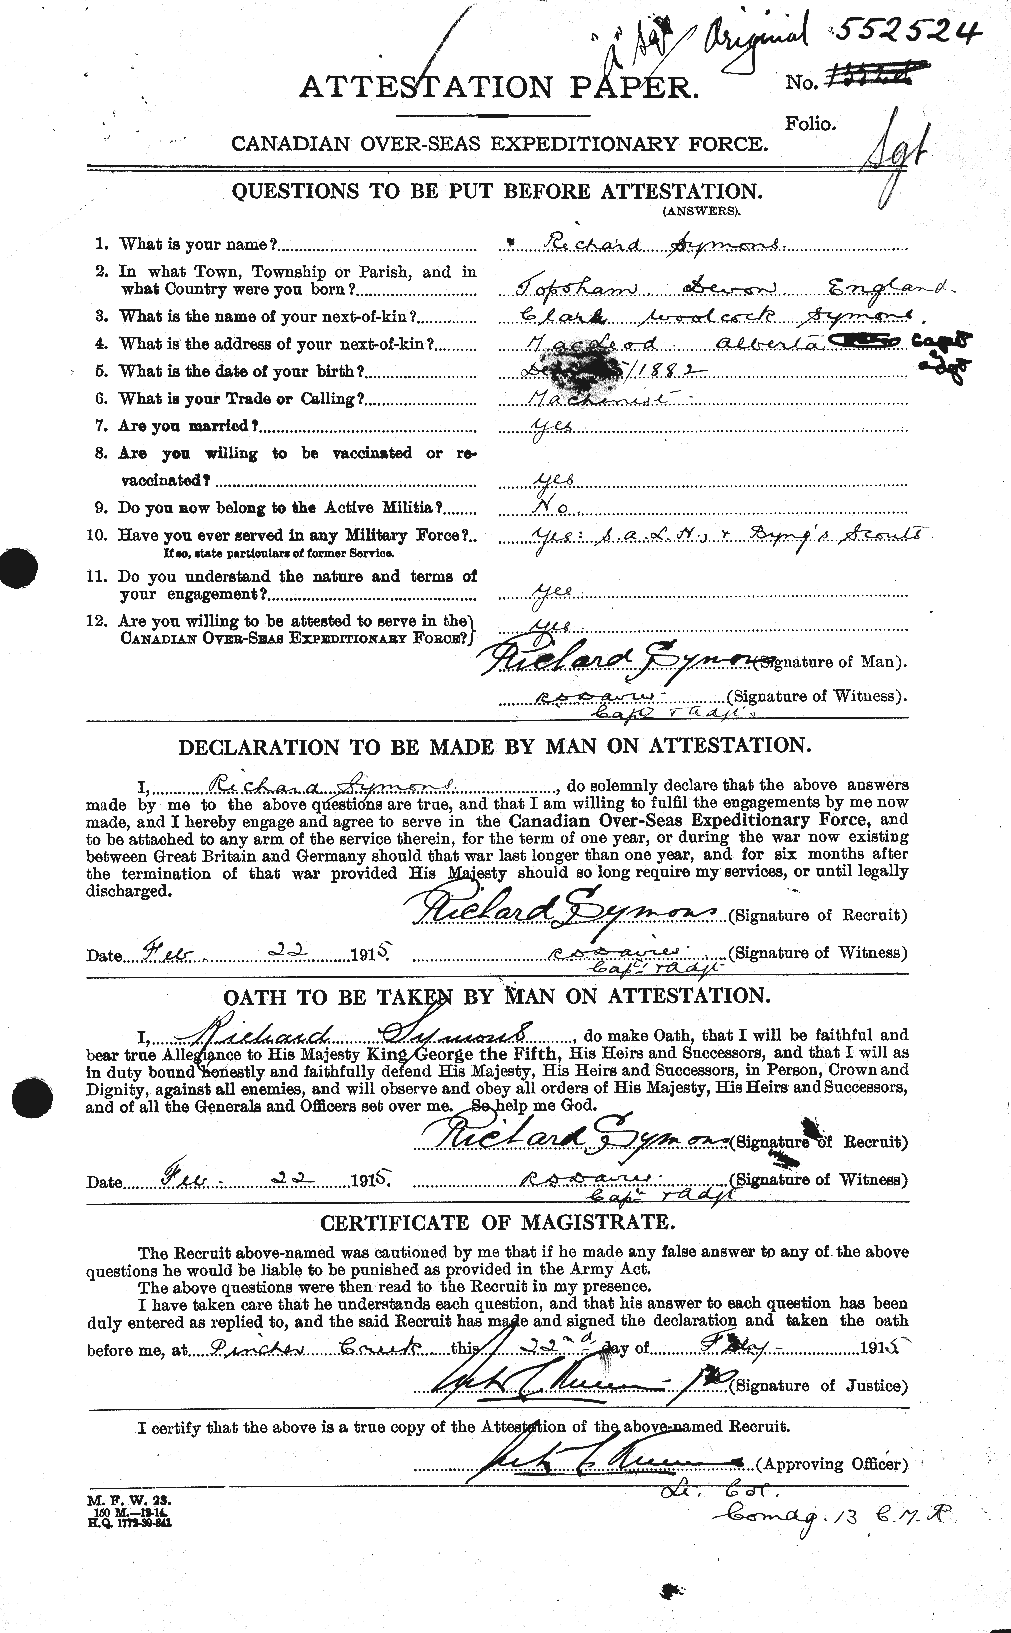 Personnel Records of the First World War - CEF 129033a